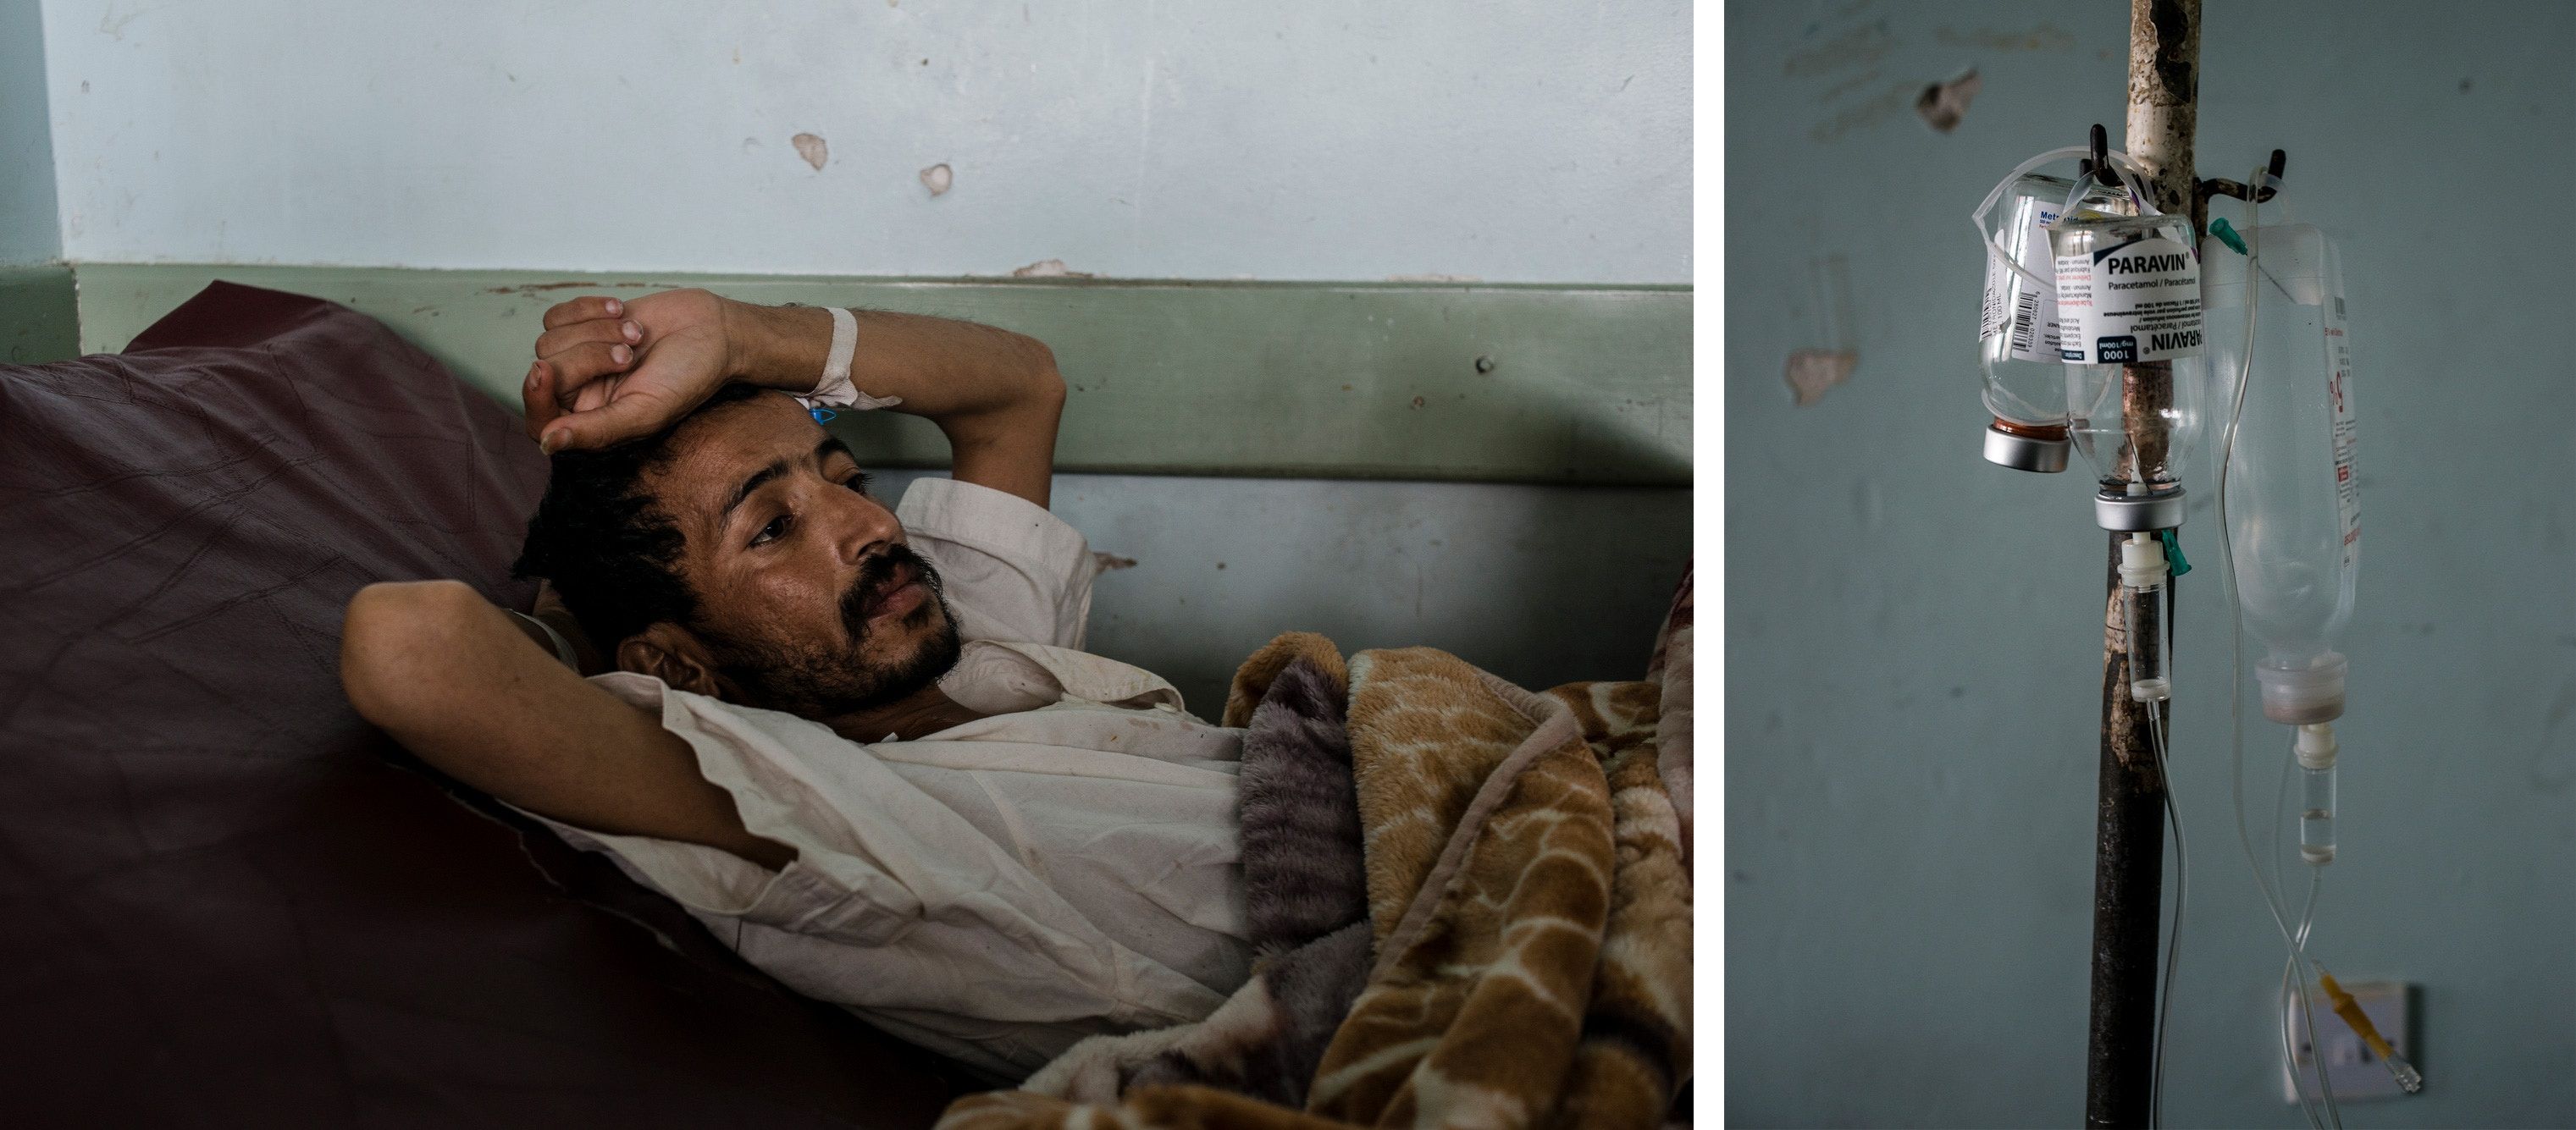 Ahmad Mohammad Morshid, who recently underwent his first round of dialysis for kidney failure, recovers in his bed on May 4, 2018, at Jumhuri Hospital. Image by Alex Potter. Yemen, 2018. 